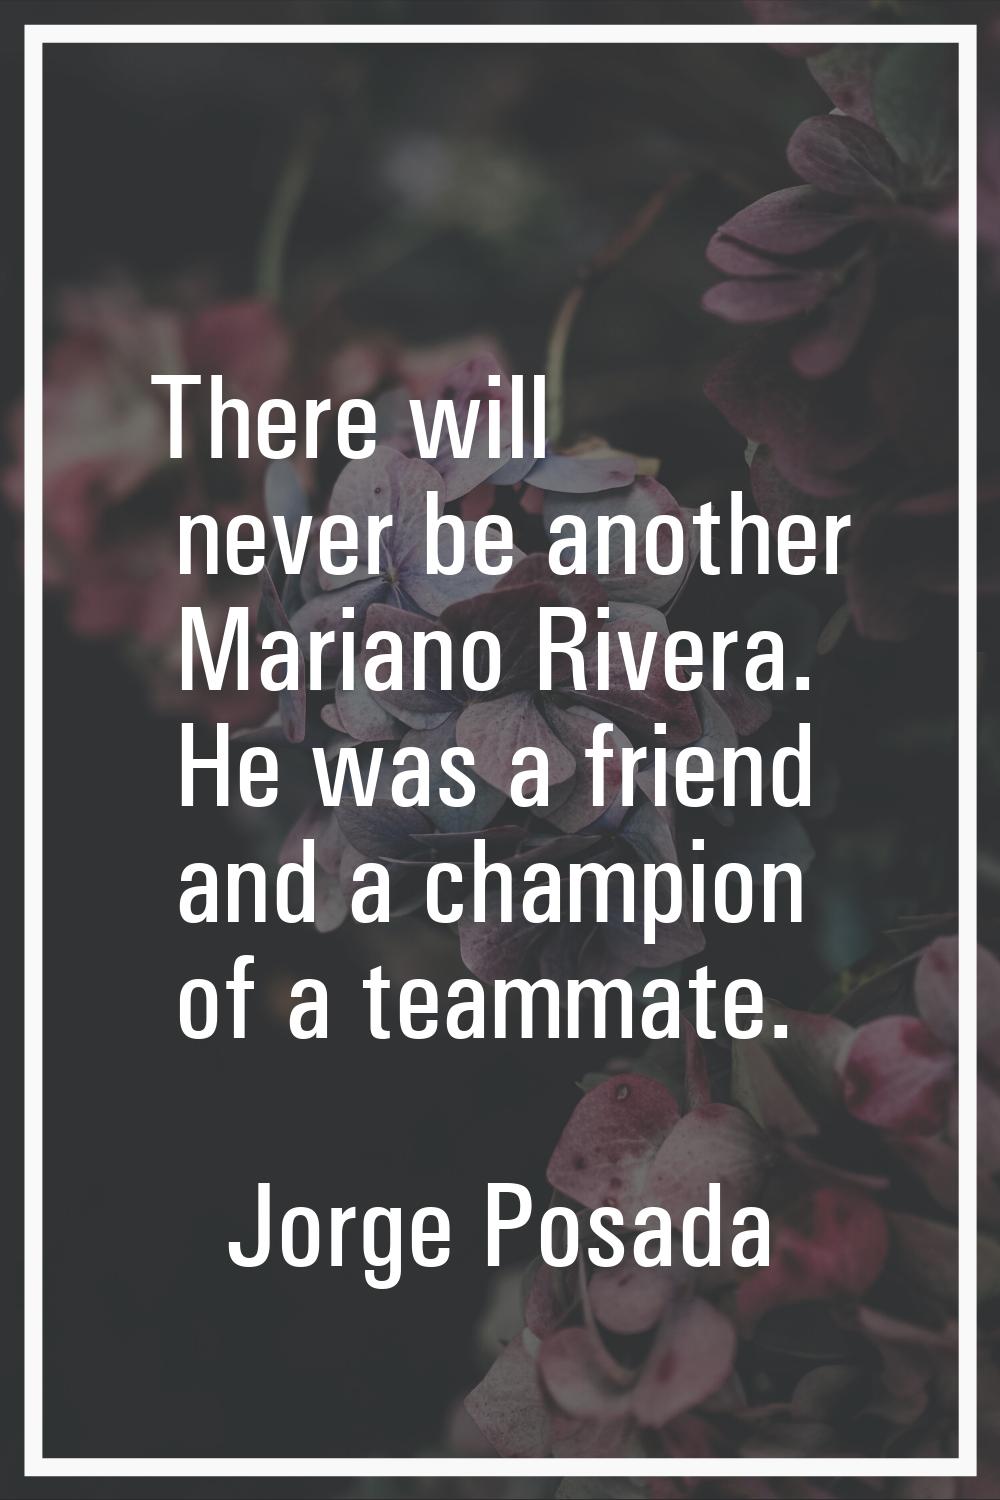 There will never be another Mariano Rivera. He was a friend and a champion of a teammate.